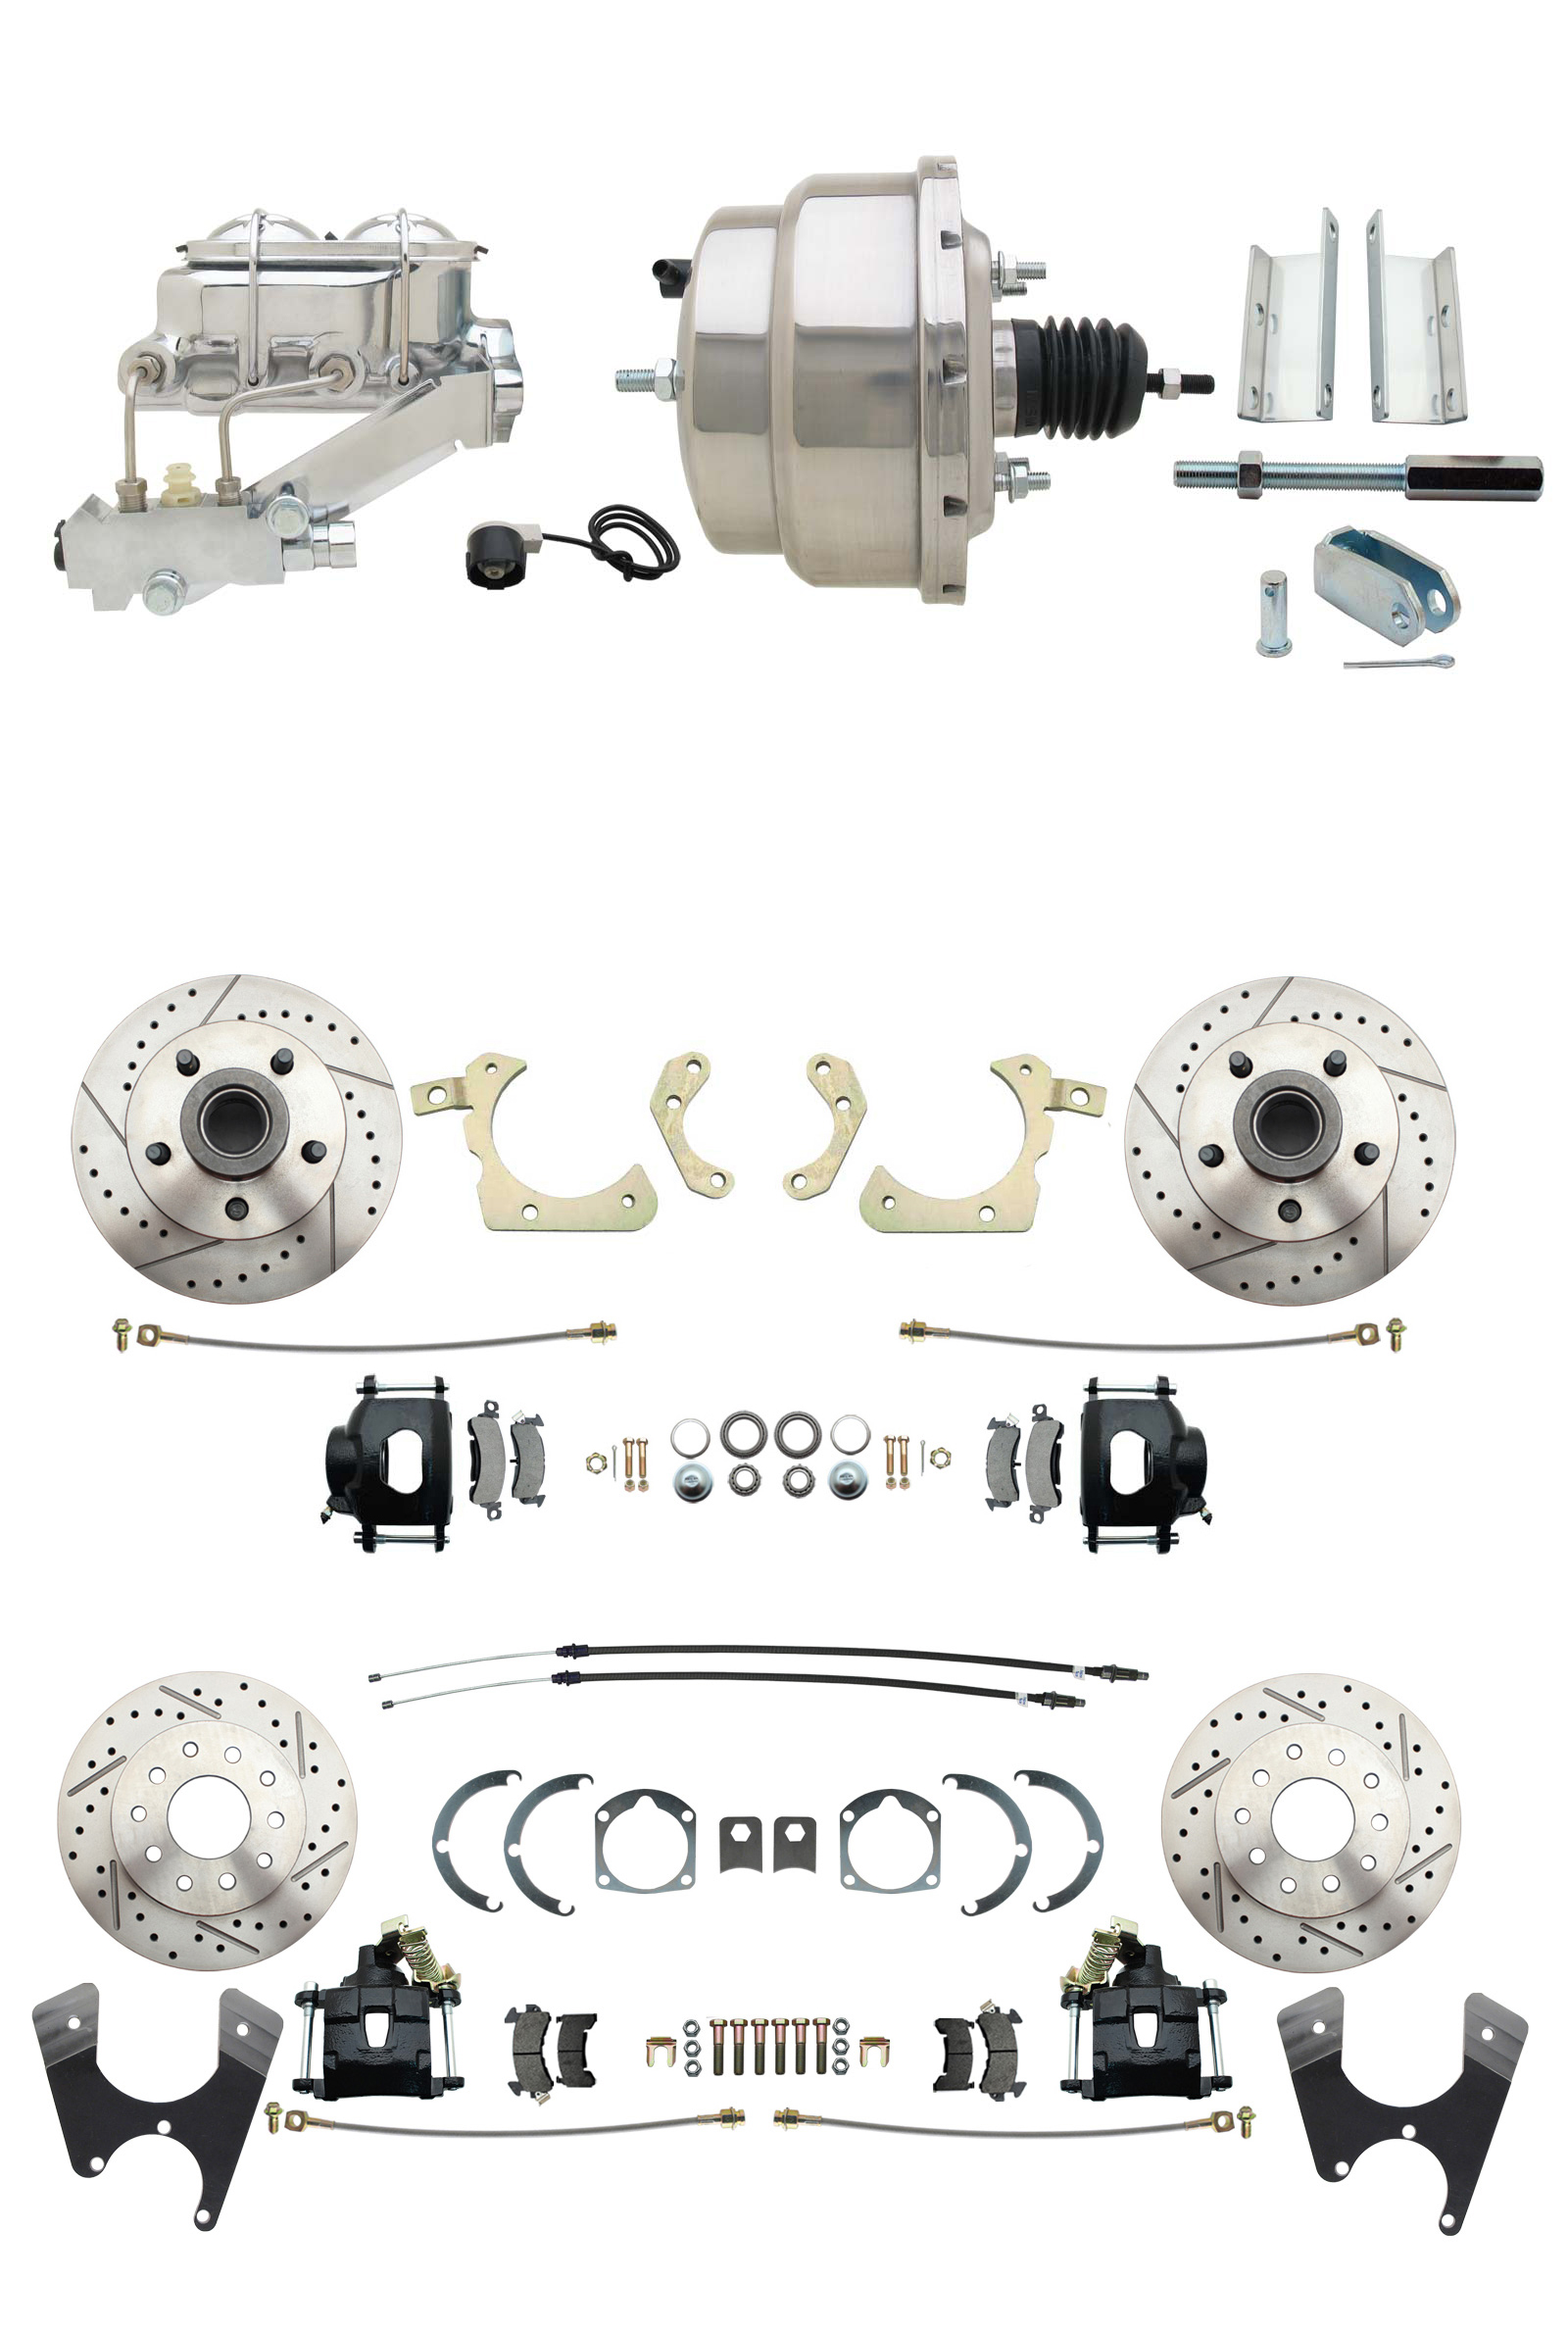 1955-1958 GM Full Size Front & Rear Power Disc Brake Kit Black Powder Coated Calipers Drilled/Slotted Rotors (Impala, Bel Air, Biscayne) & 8 Dual Stainless Steel Booster Conversion Kit W/ Chrome Master Cylinder Left Mou